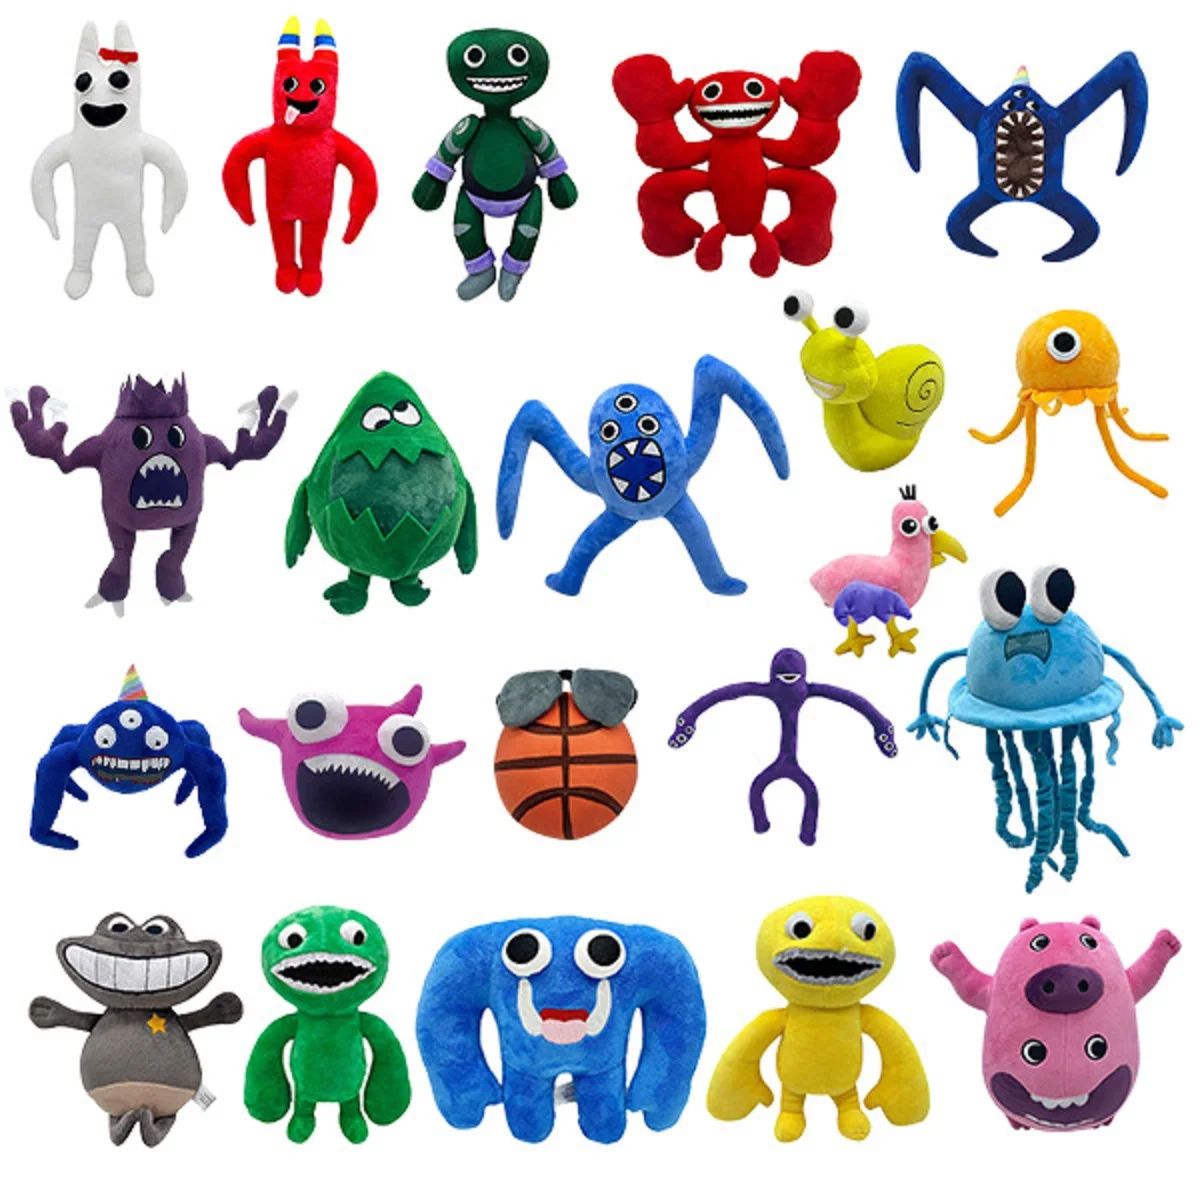 

1/8pcs 25cm The Garten Of Banban Plush Game Animation Children's Birthday Gifts And Holiday Gifts Room Decor Plushies Toy